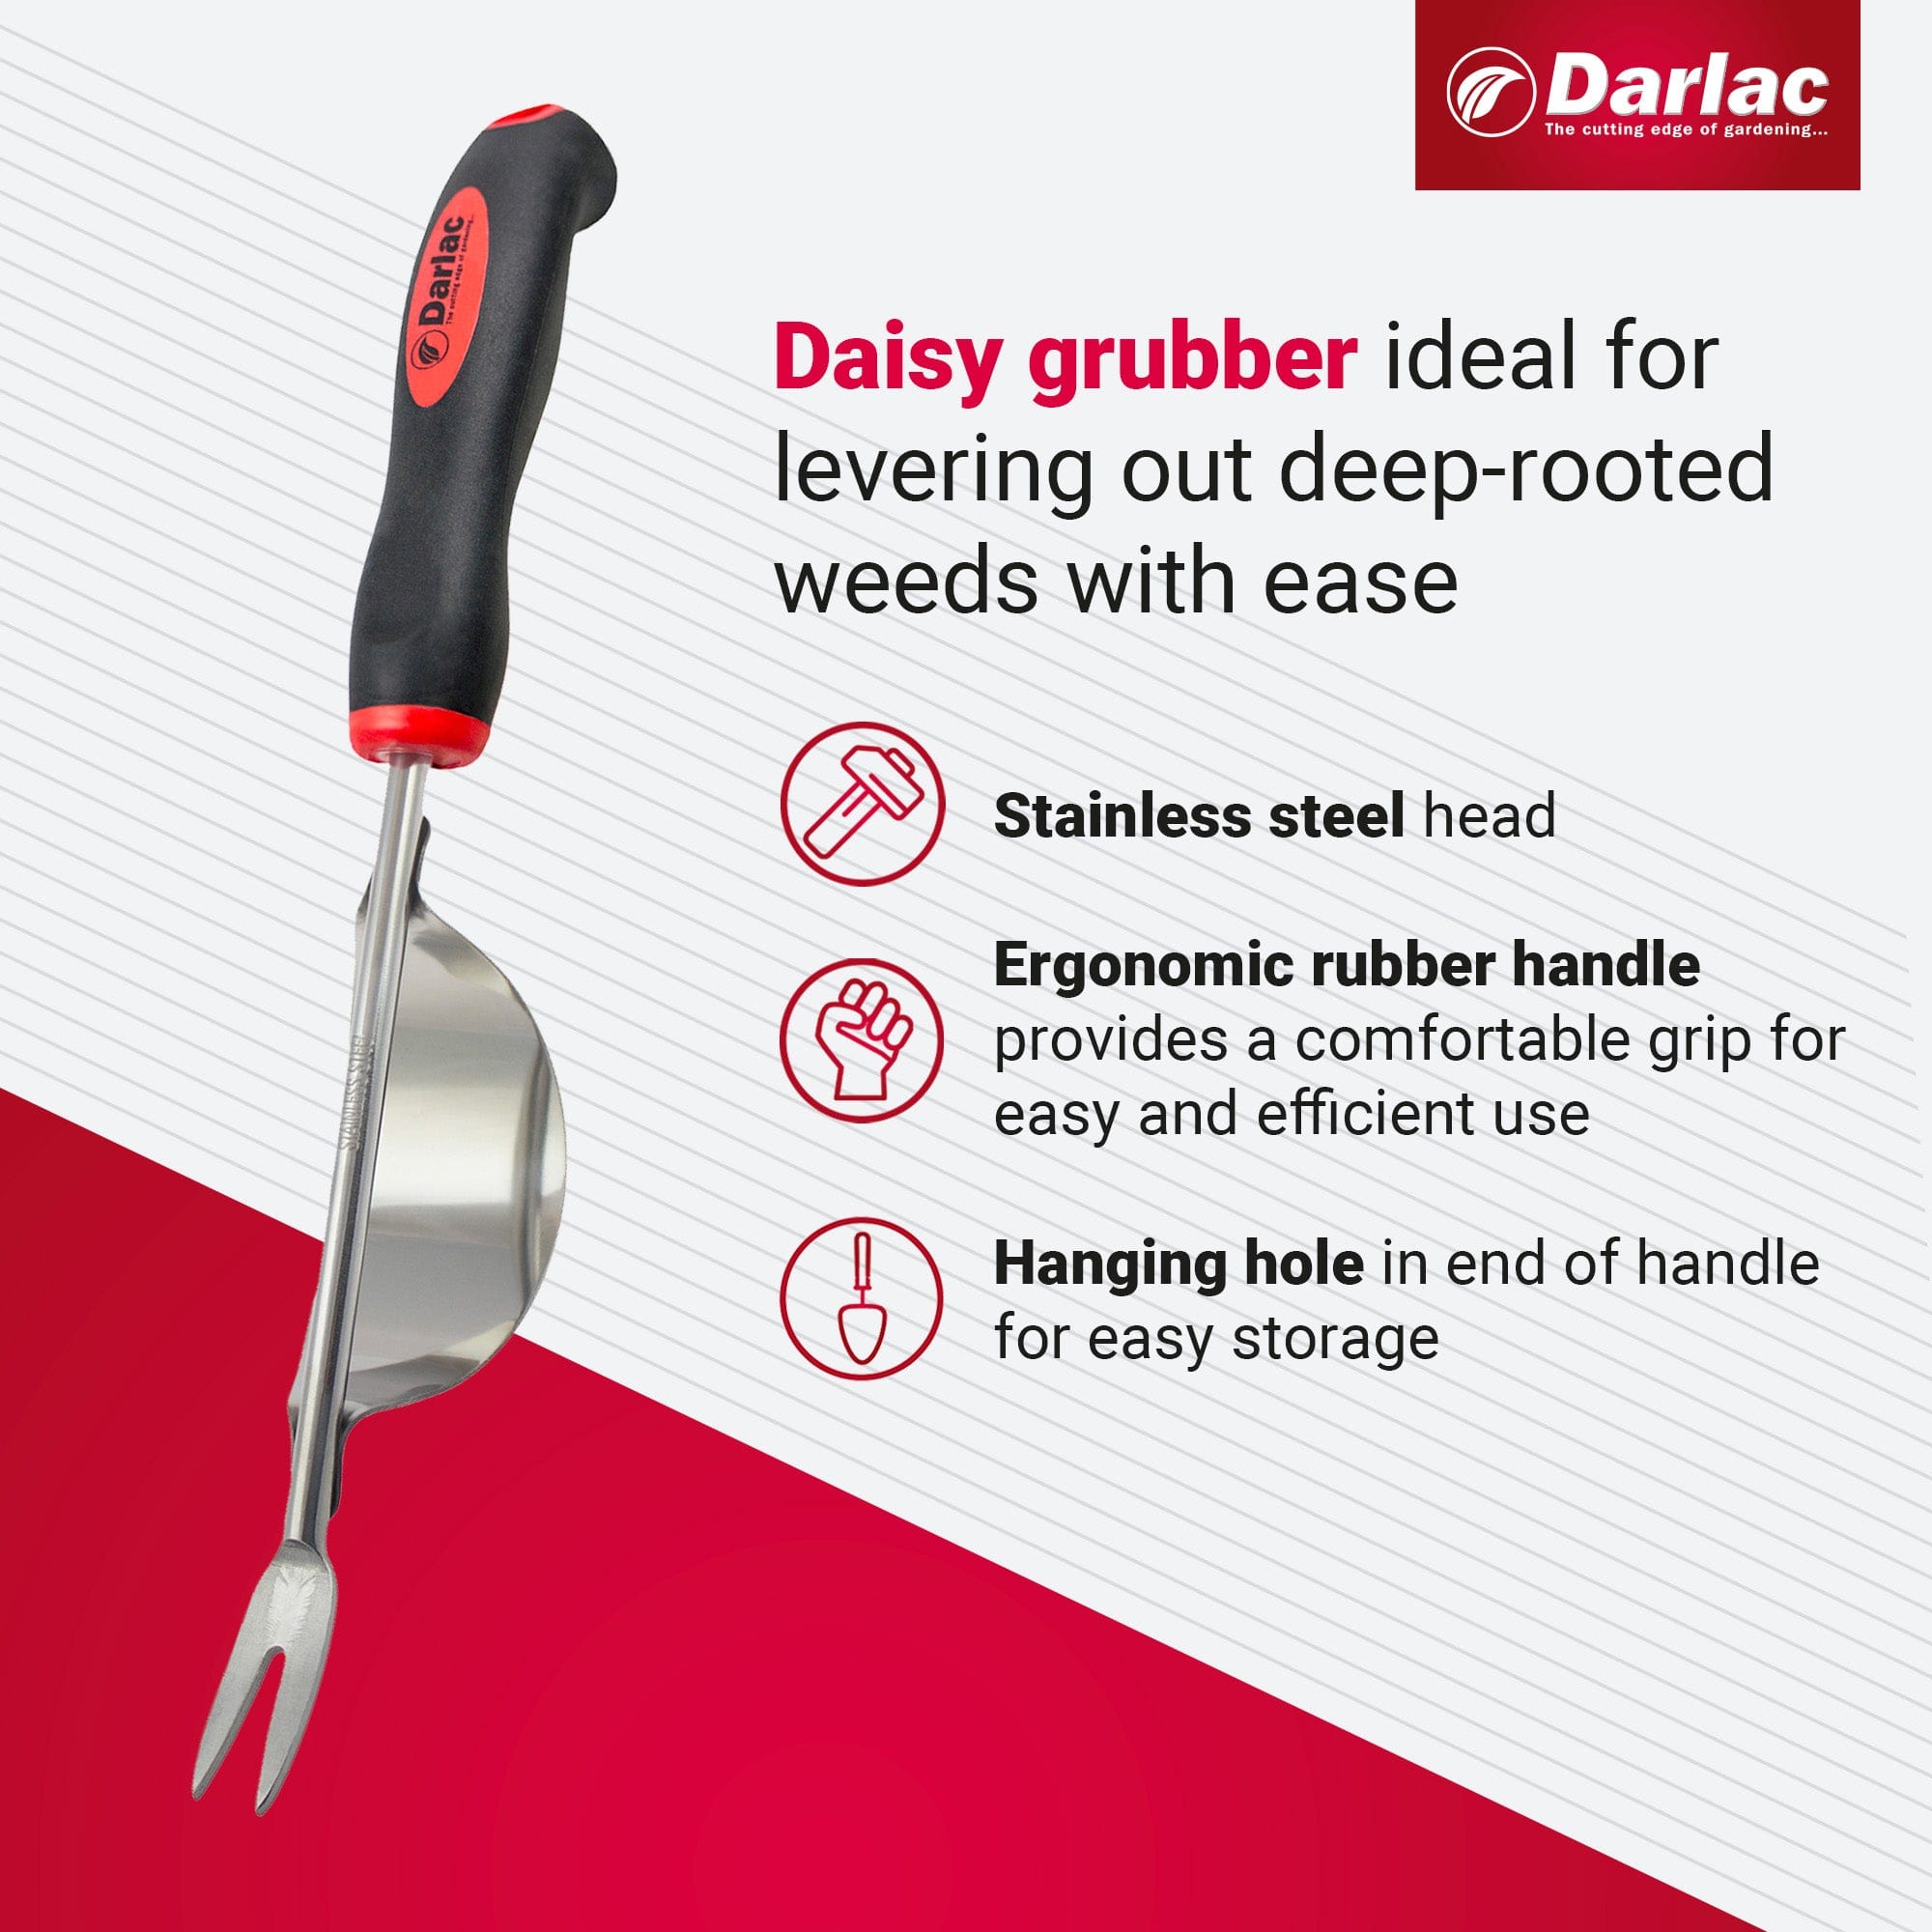 Darlac Stainless Steel Daisy Grubber